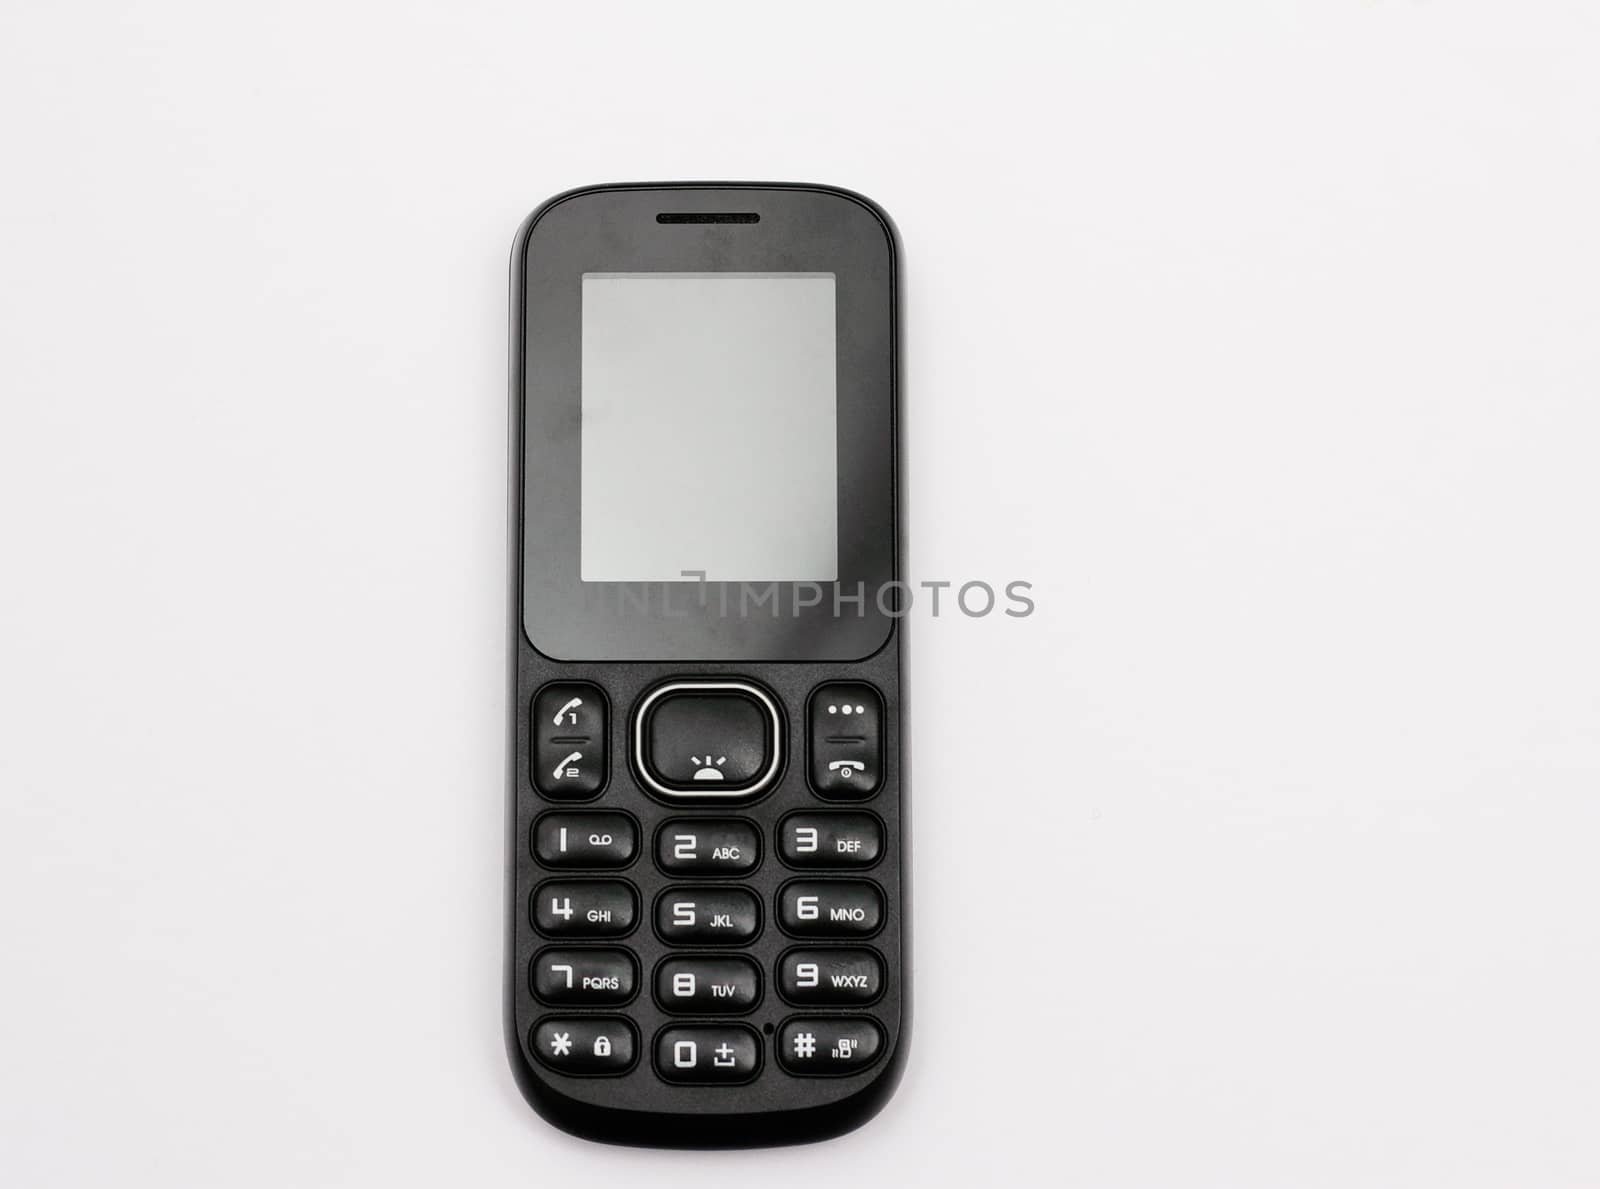 Push-button mobile phone in black isolated on white background.